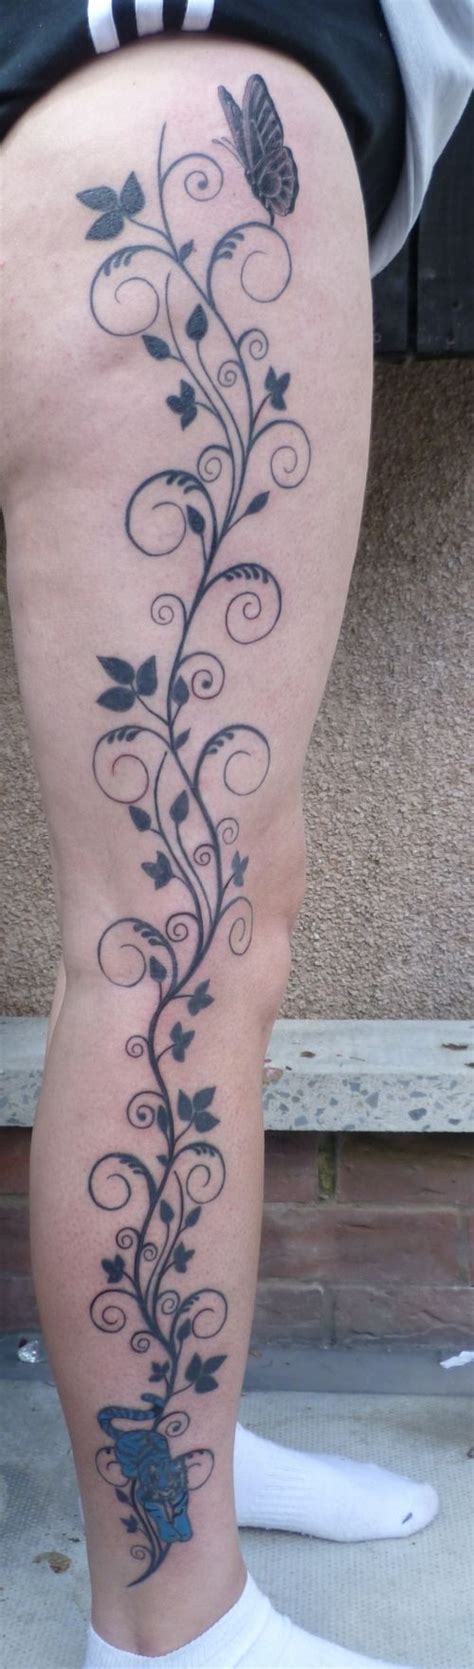 Vine On Right Leg With Butterfly And Tiger With Orange Eyes Flower